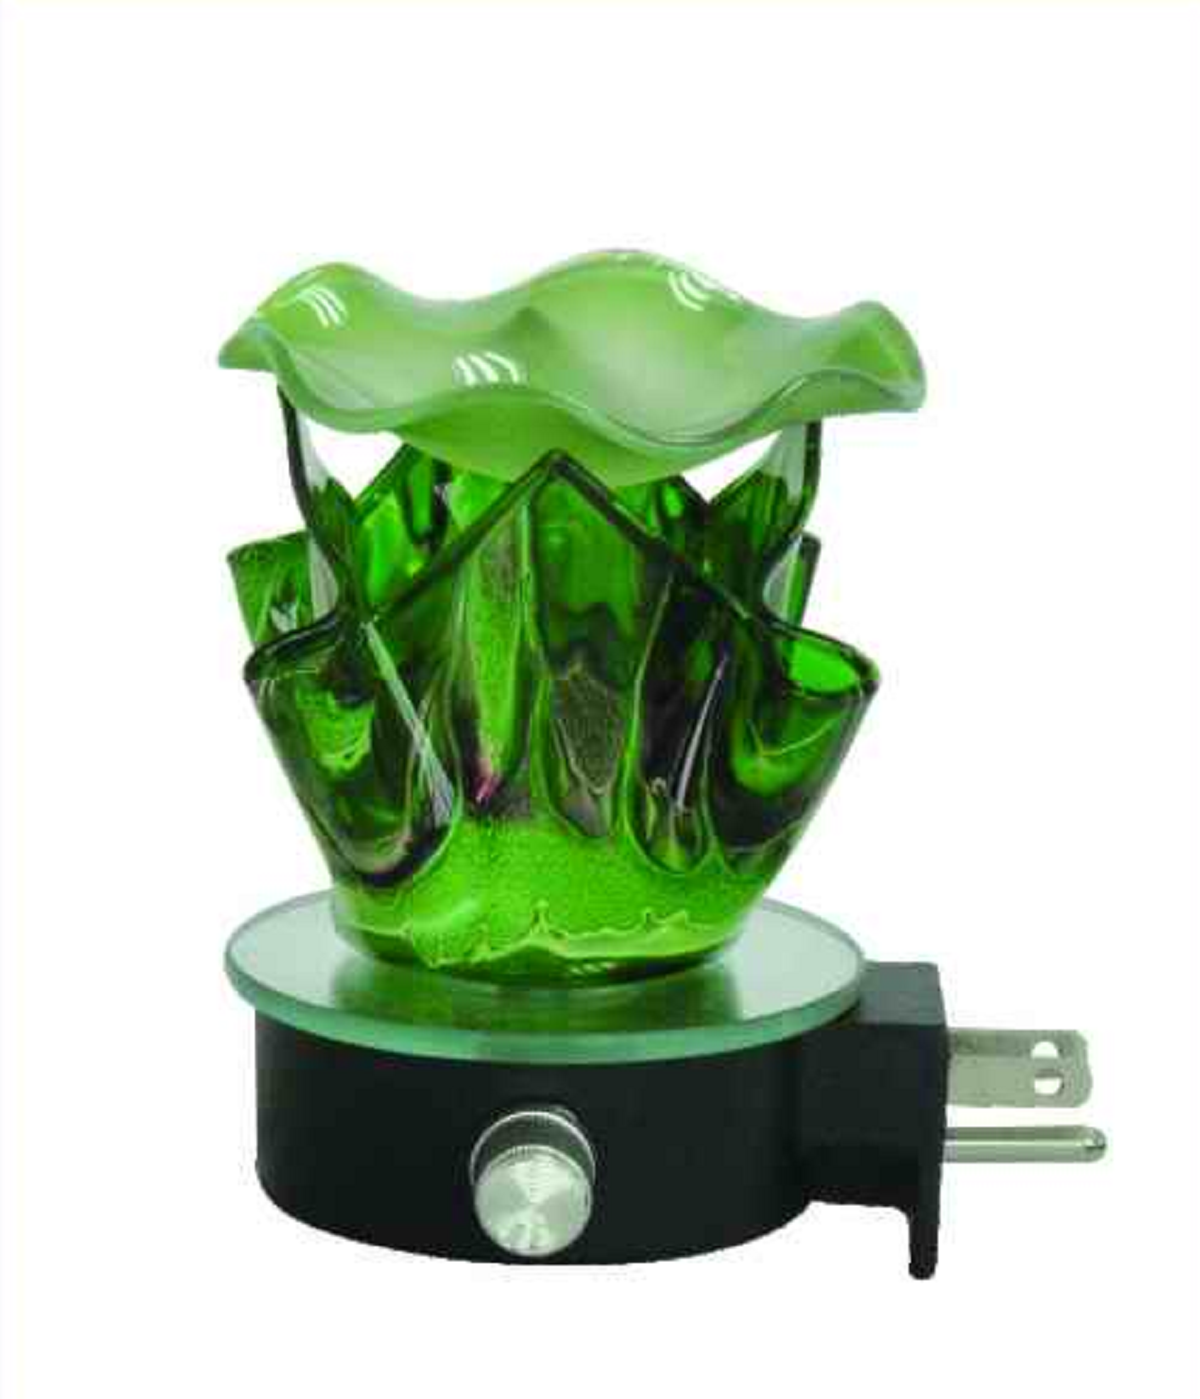 GREEN FORTUNE COOKIE WALL BURNER